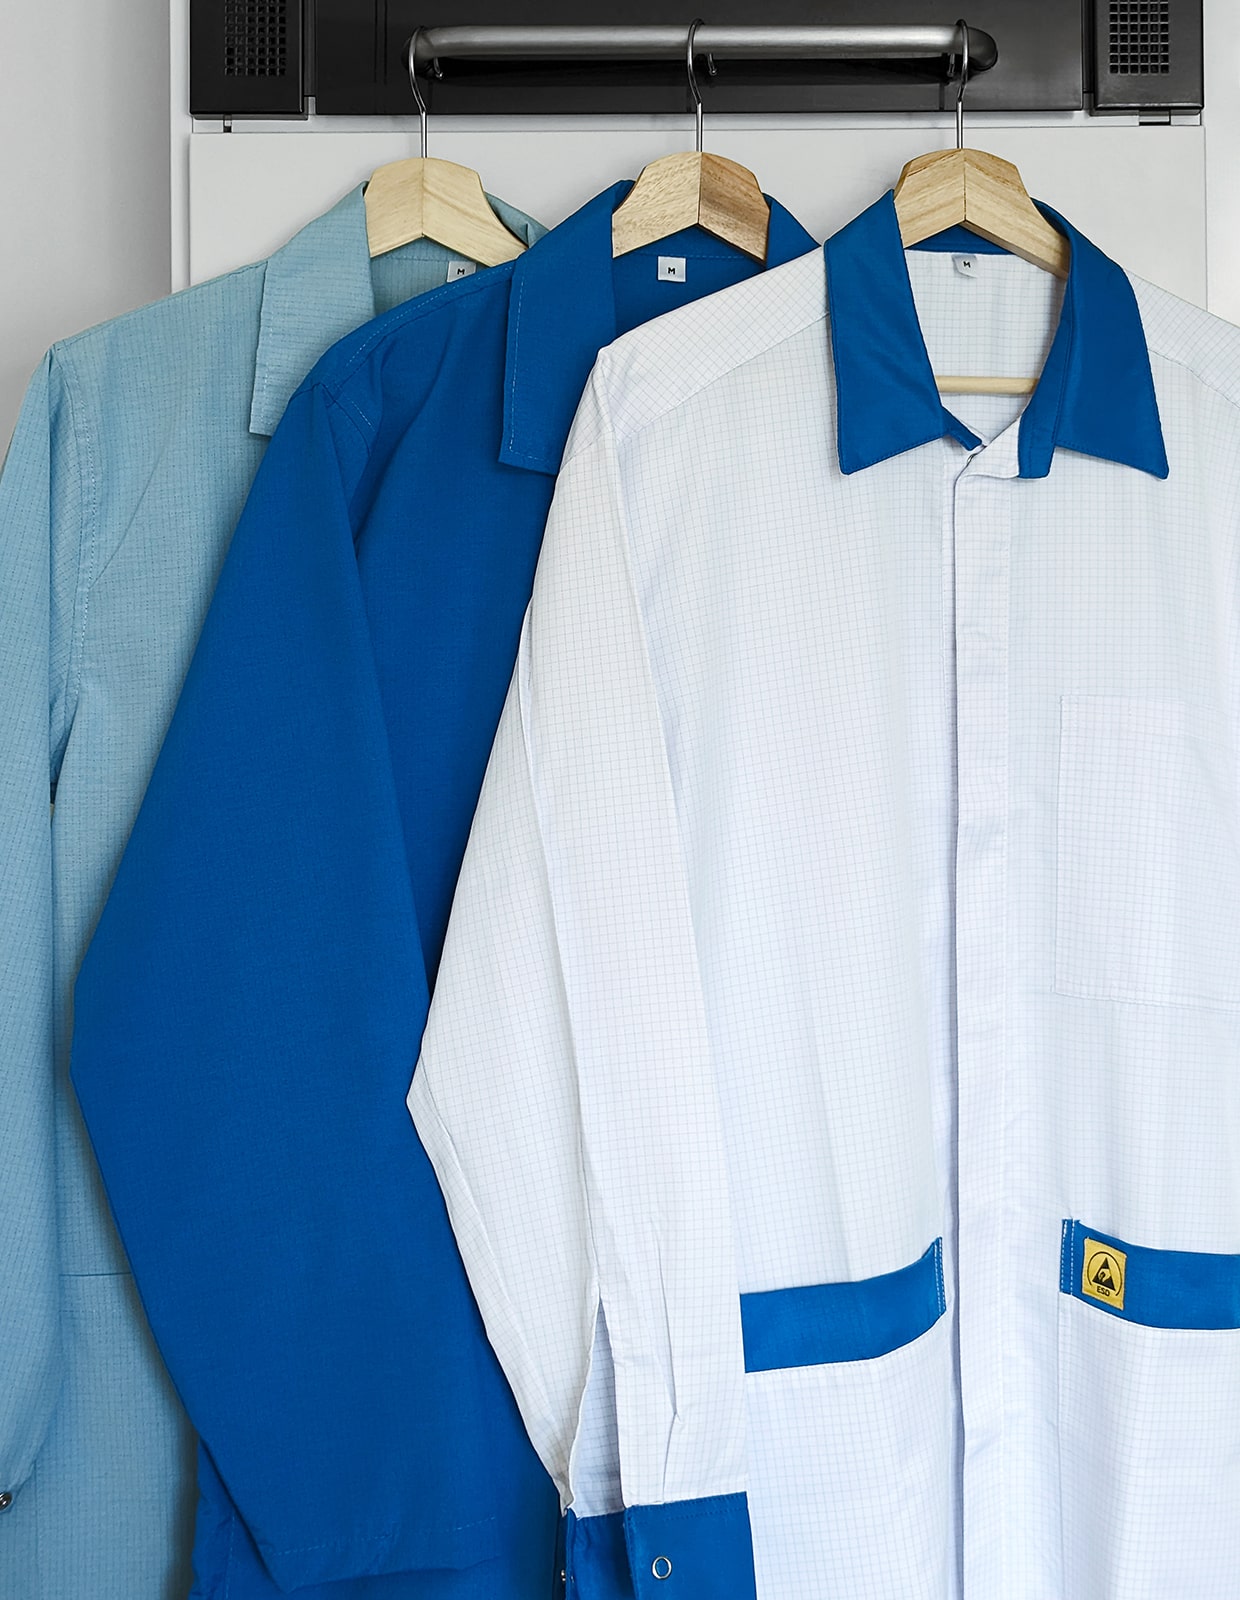 Behind the scenes photo of three hanging lab coats, ready for the photo shoot